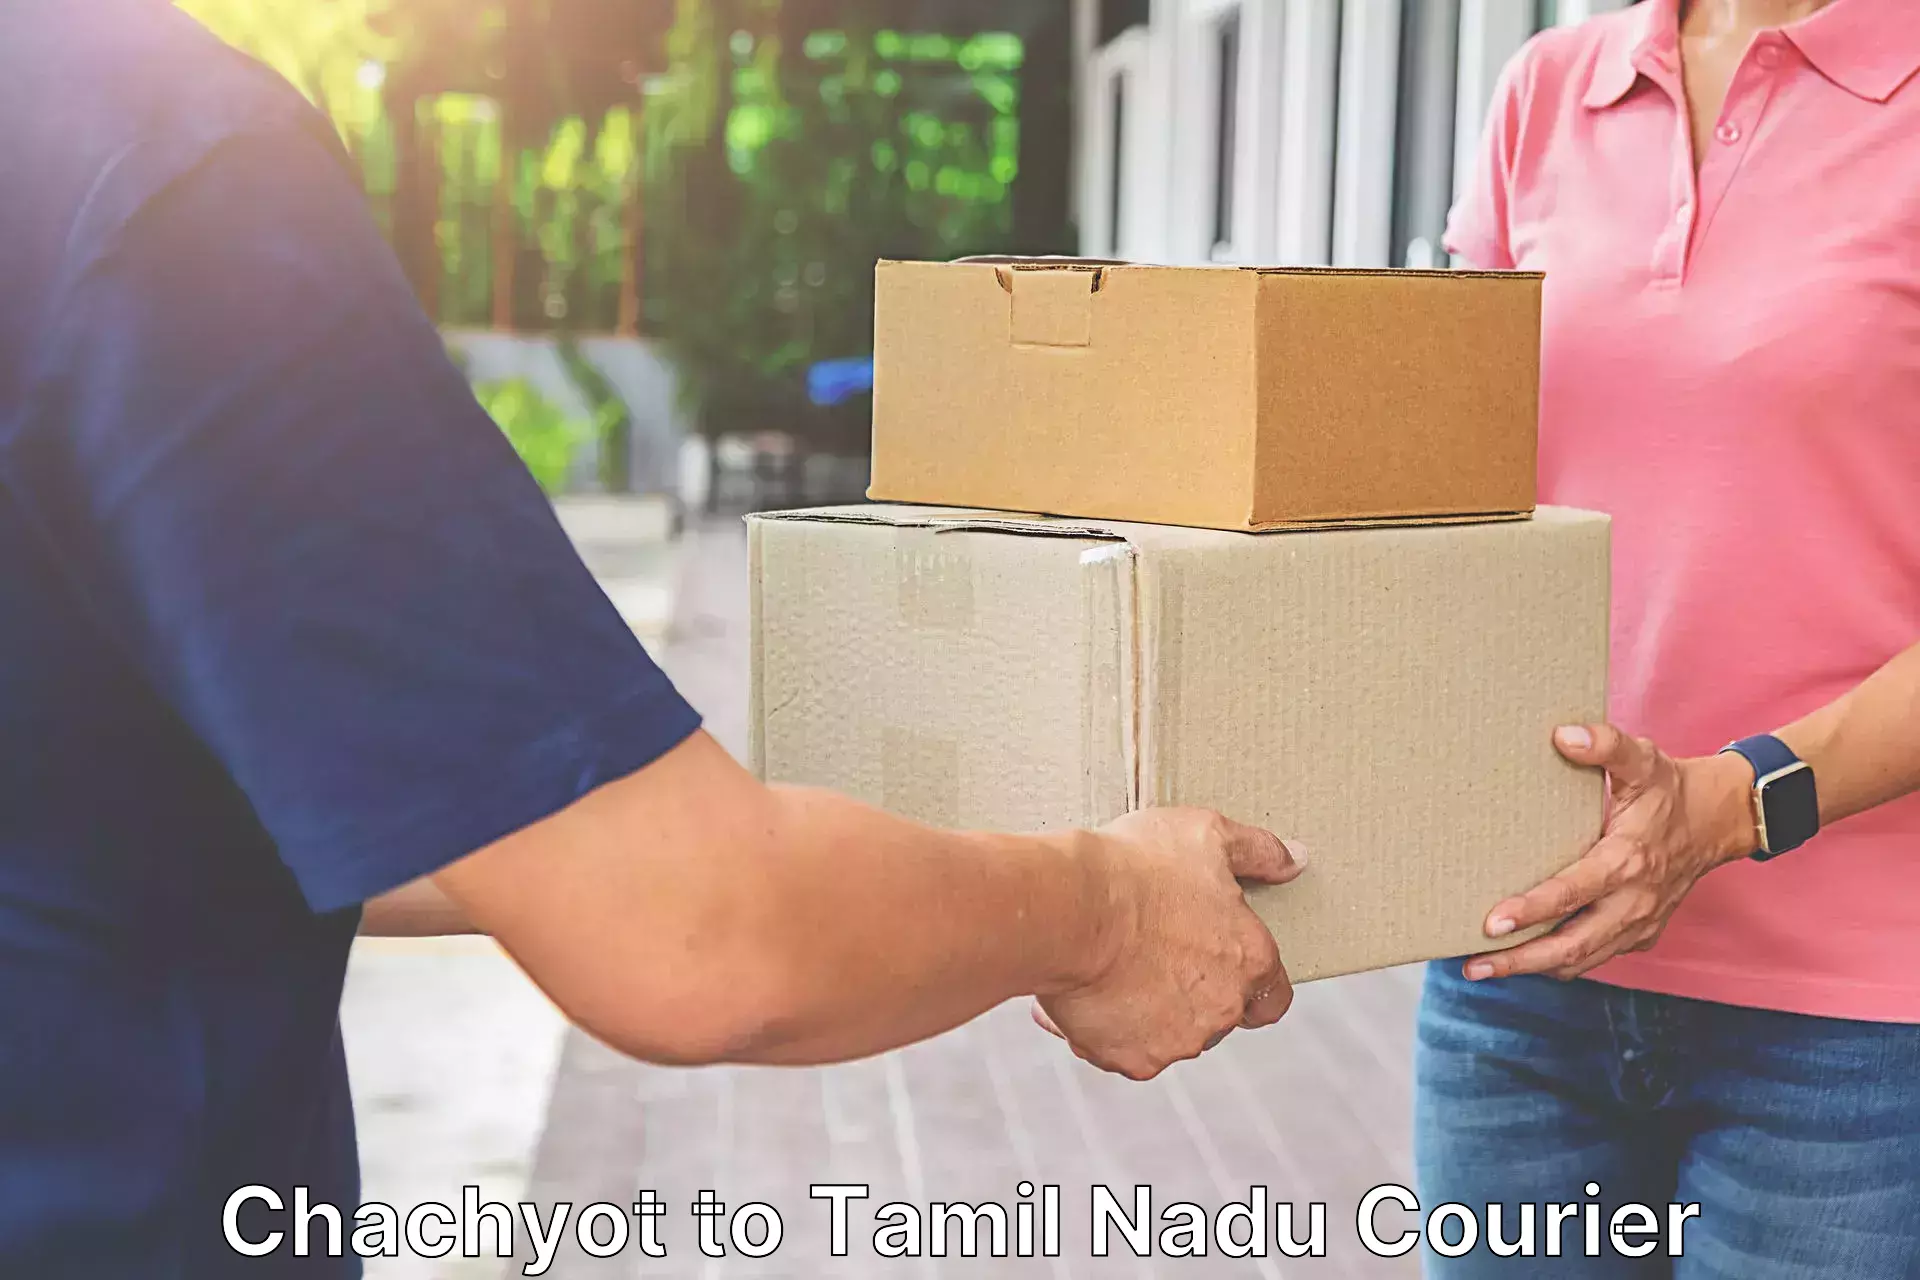 Nationwide delivery network in Chachyot to Palani